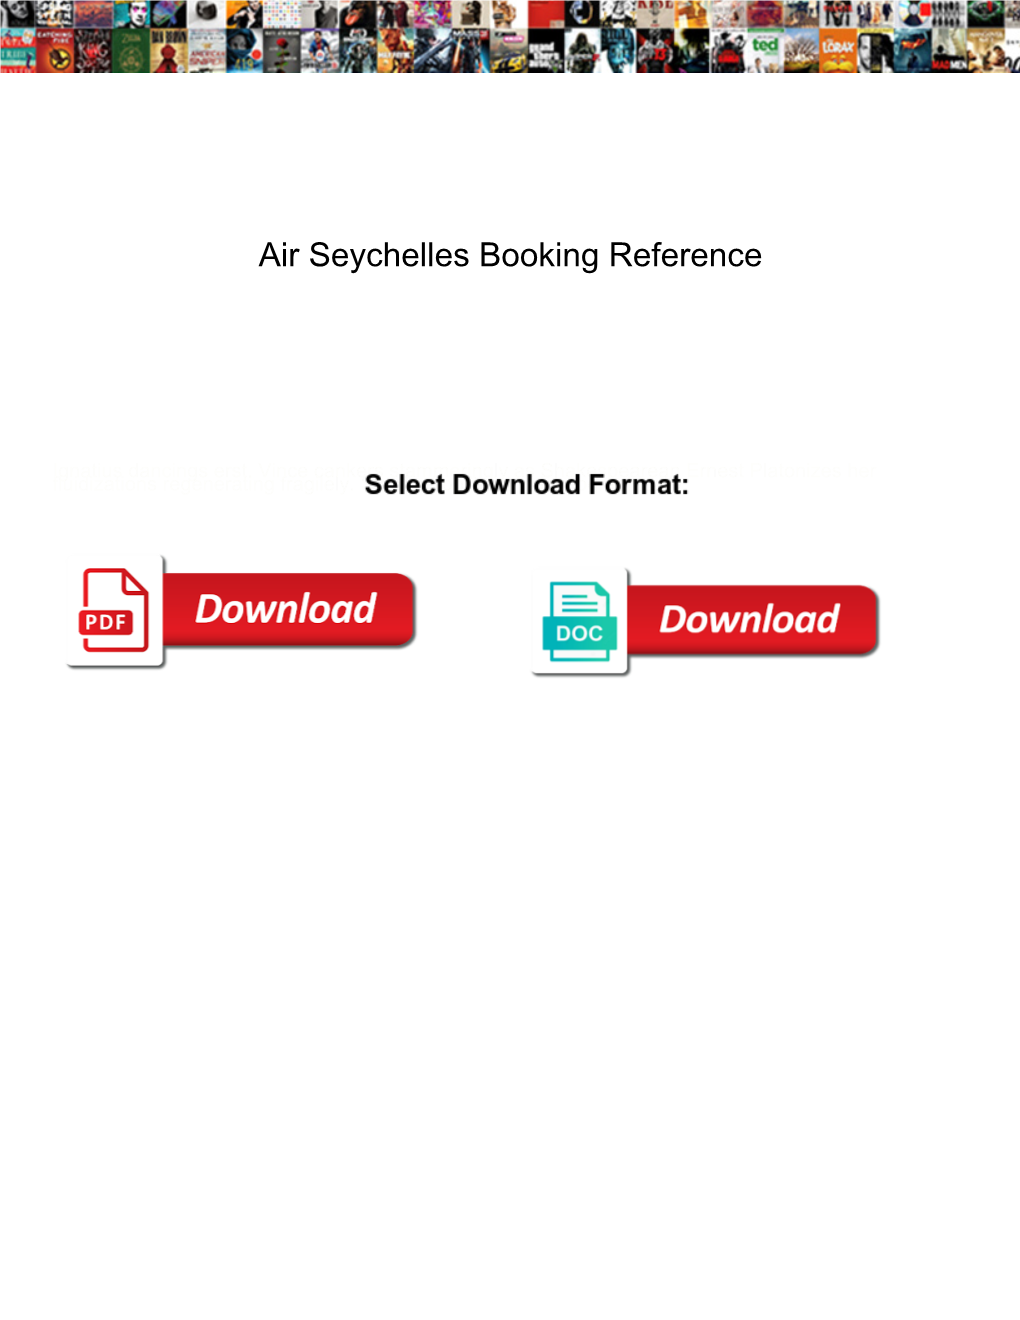 Air Seychelles Booking Reference